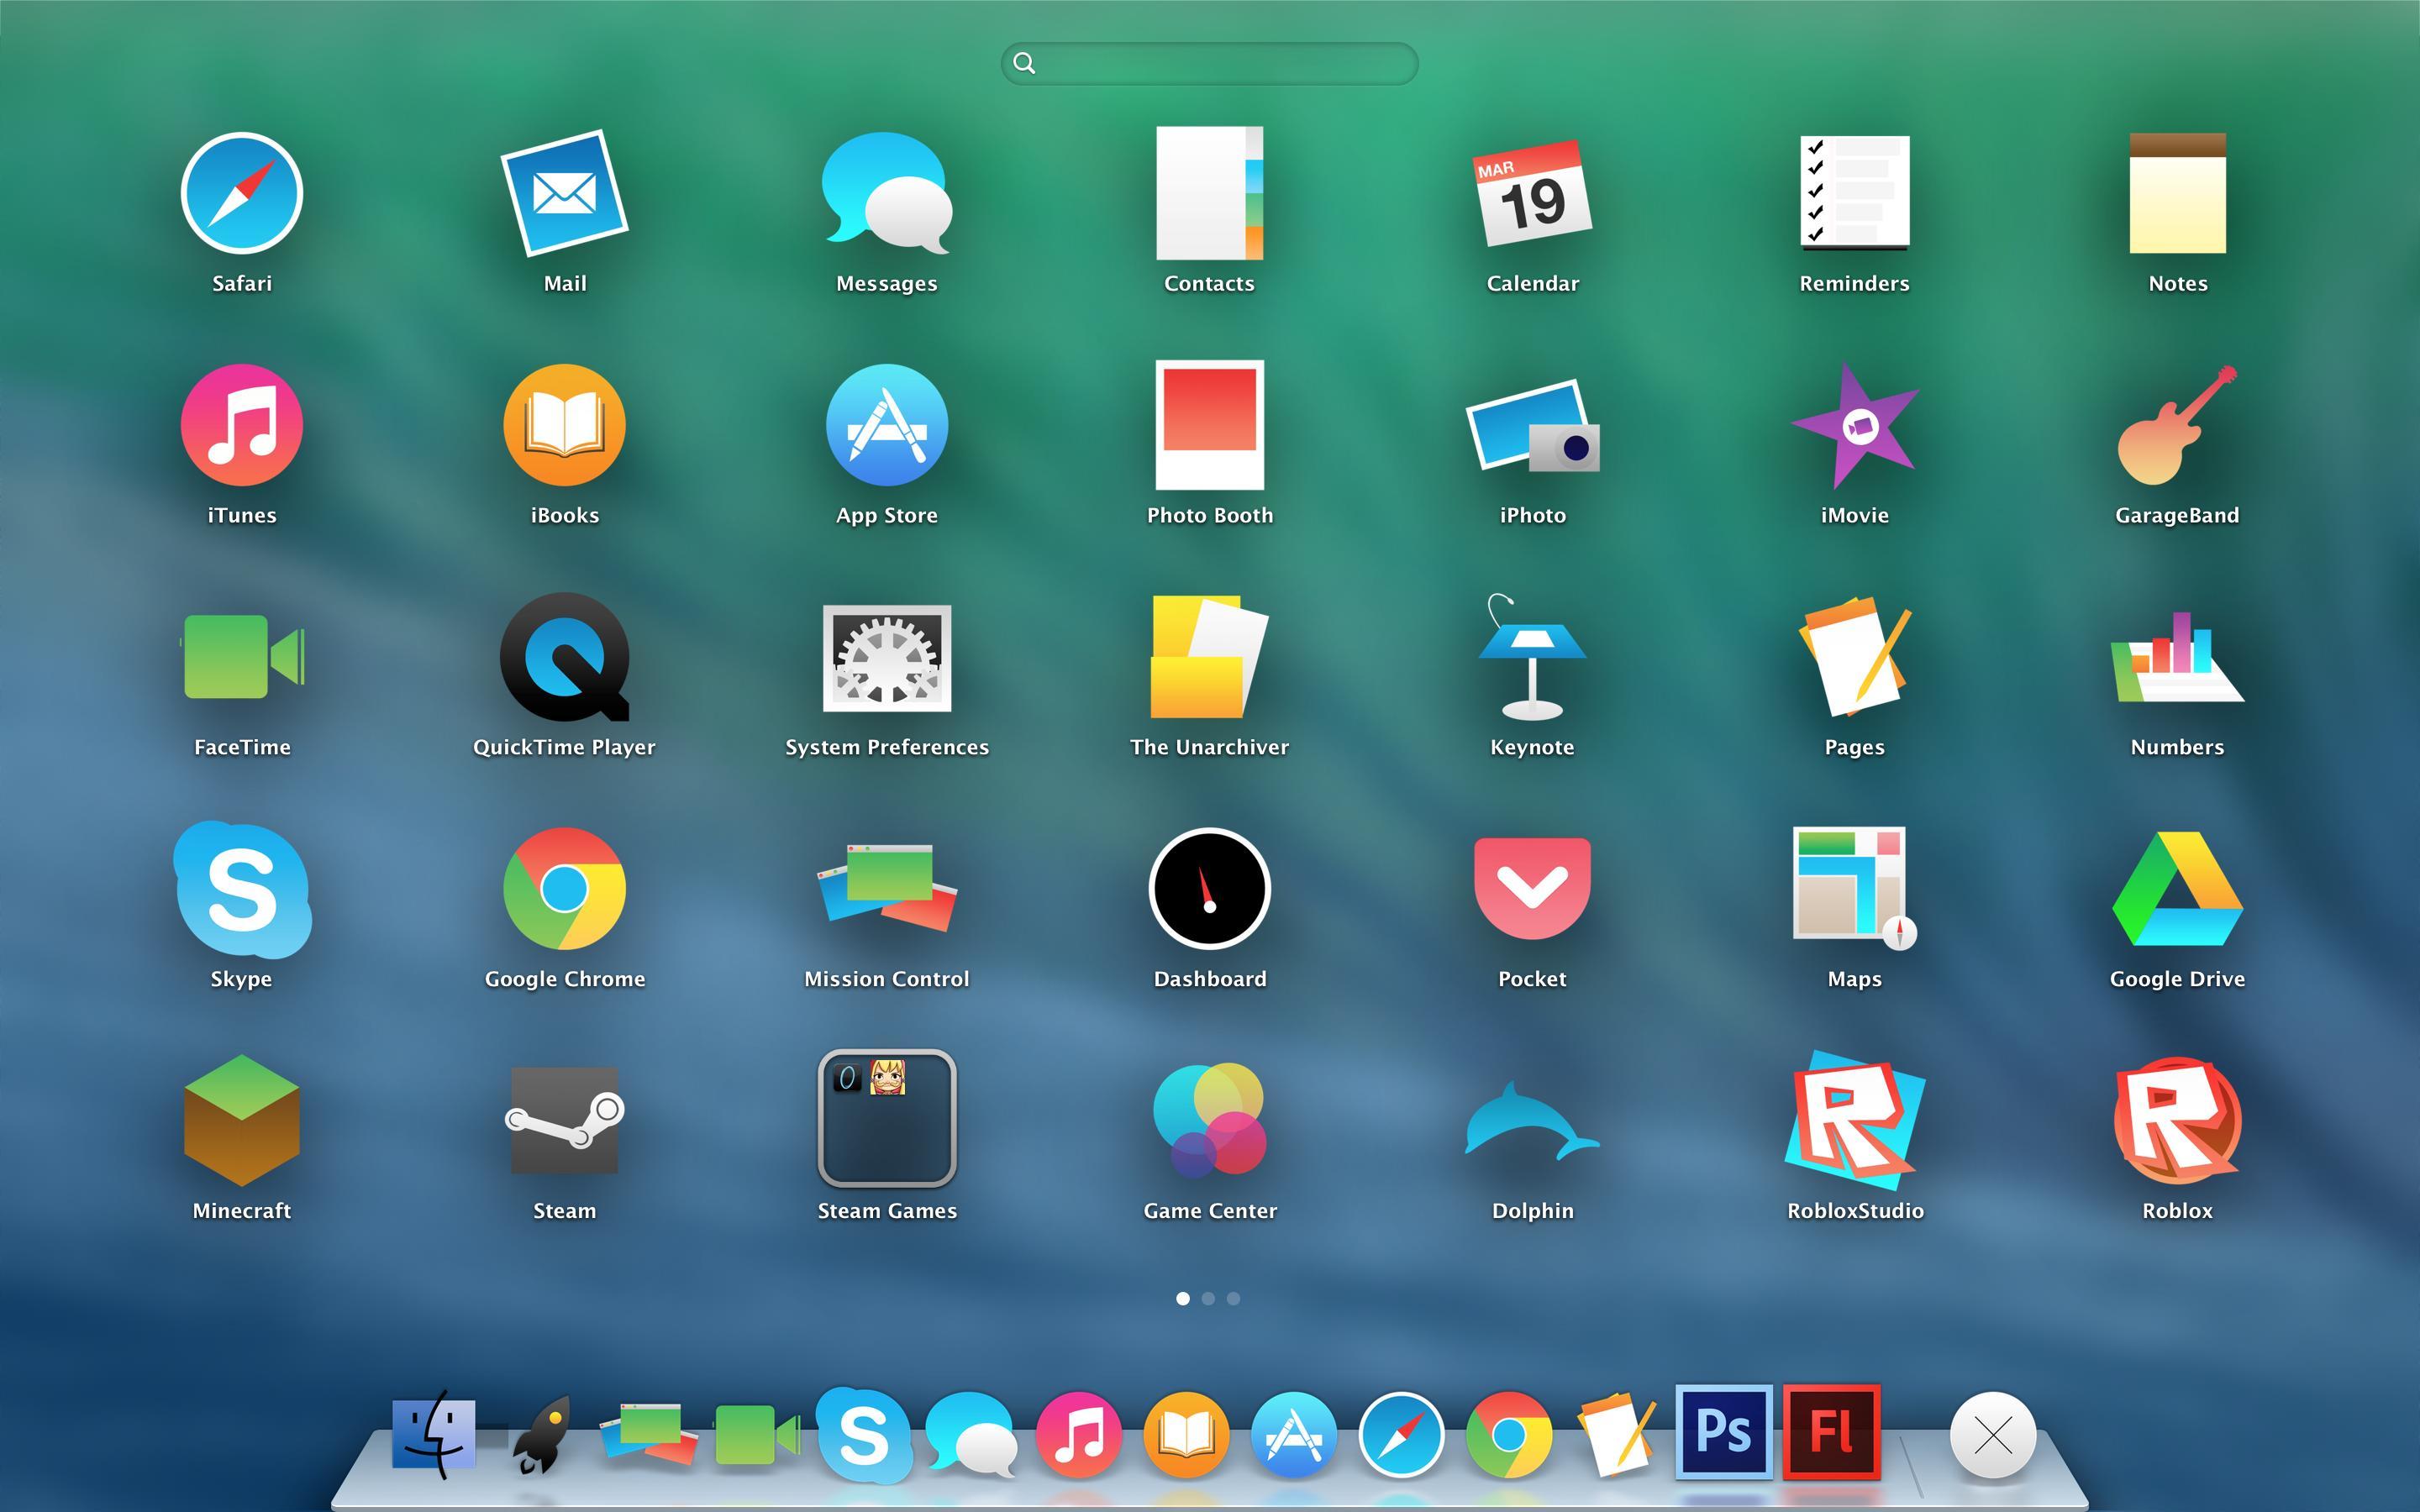 instal the new for mac EximiousSoft Vector Icon Pro 5.12